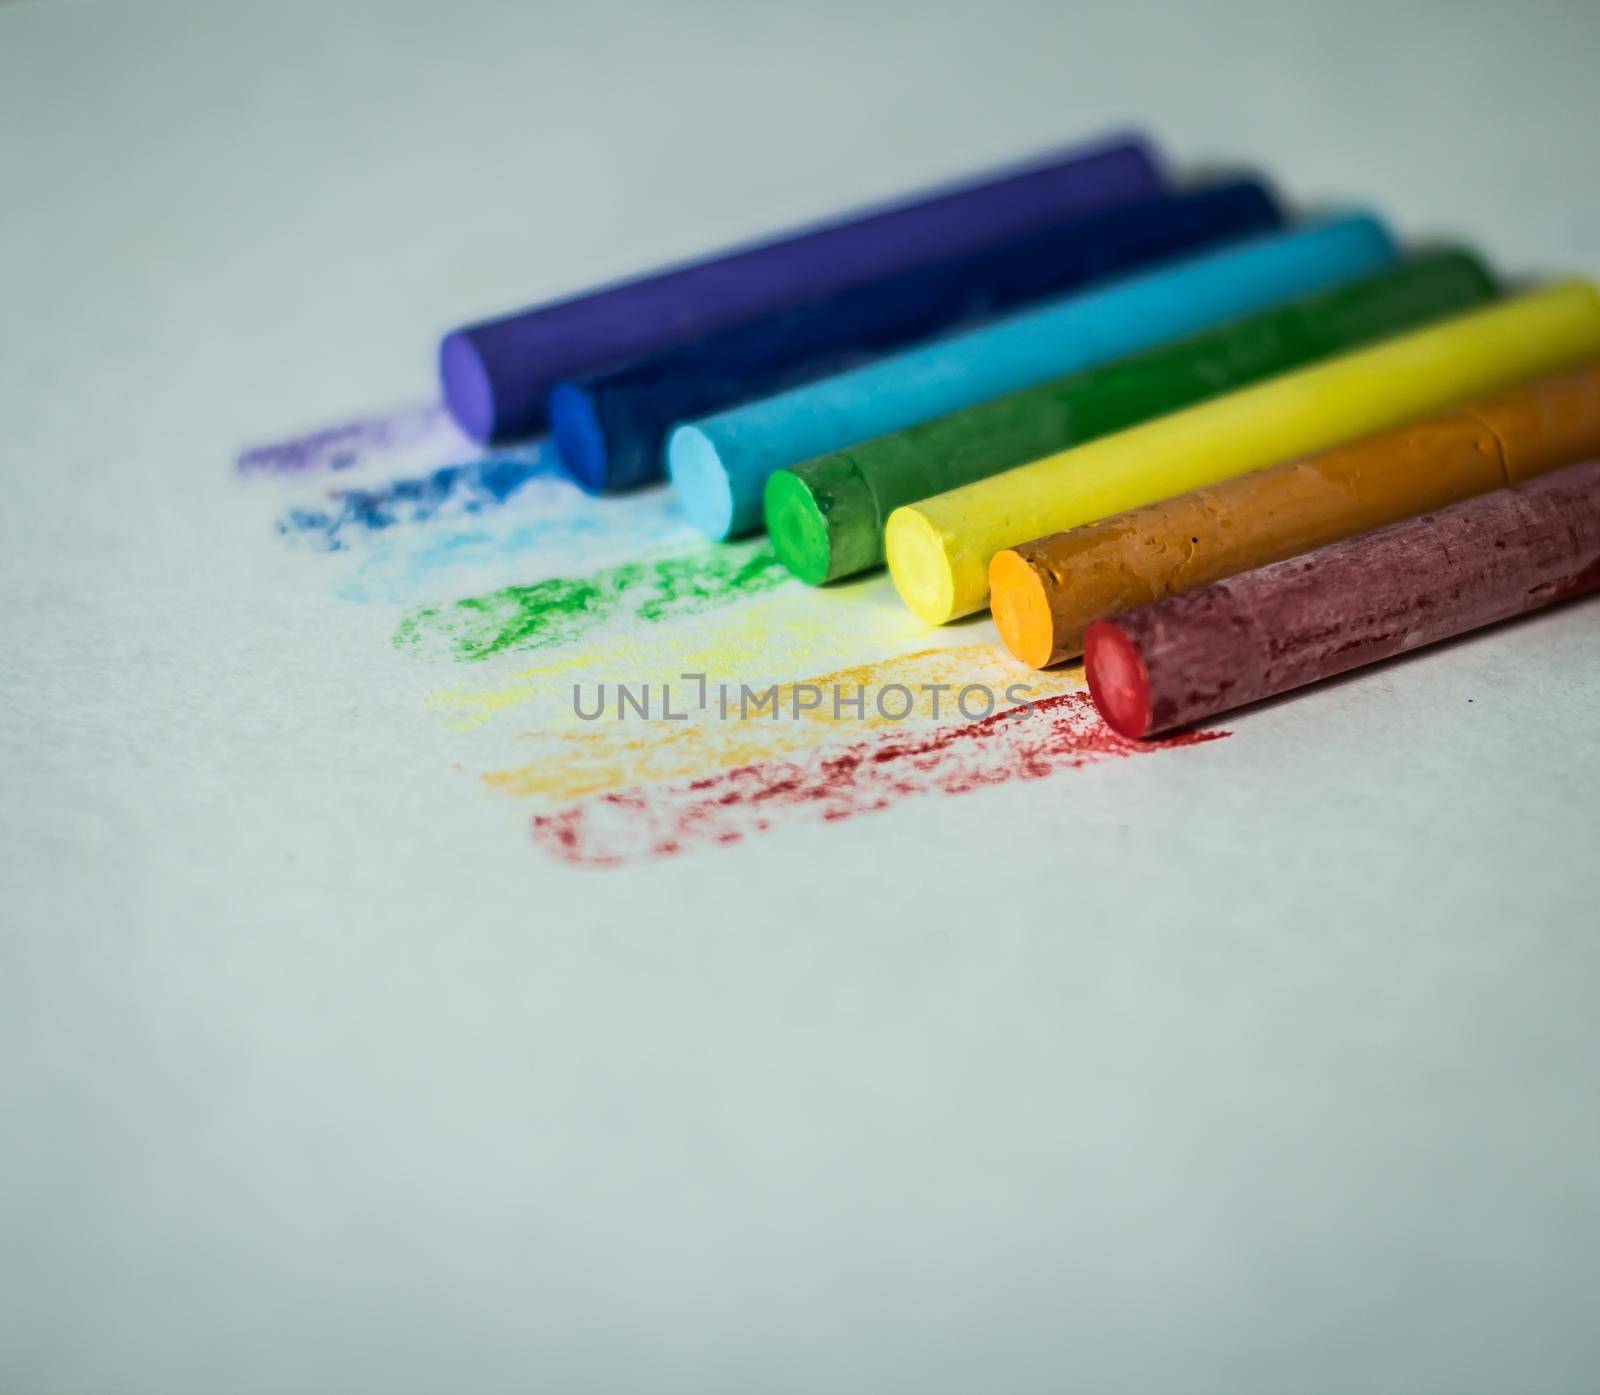 multicolored crayons for drawing.isolated on a white background.photo with copy space